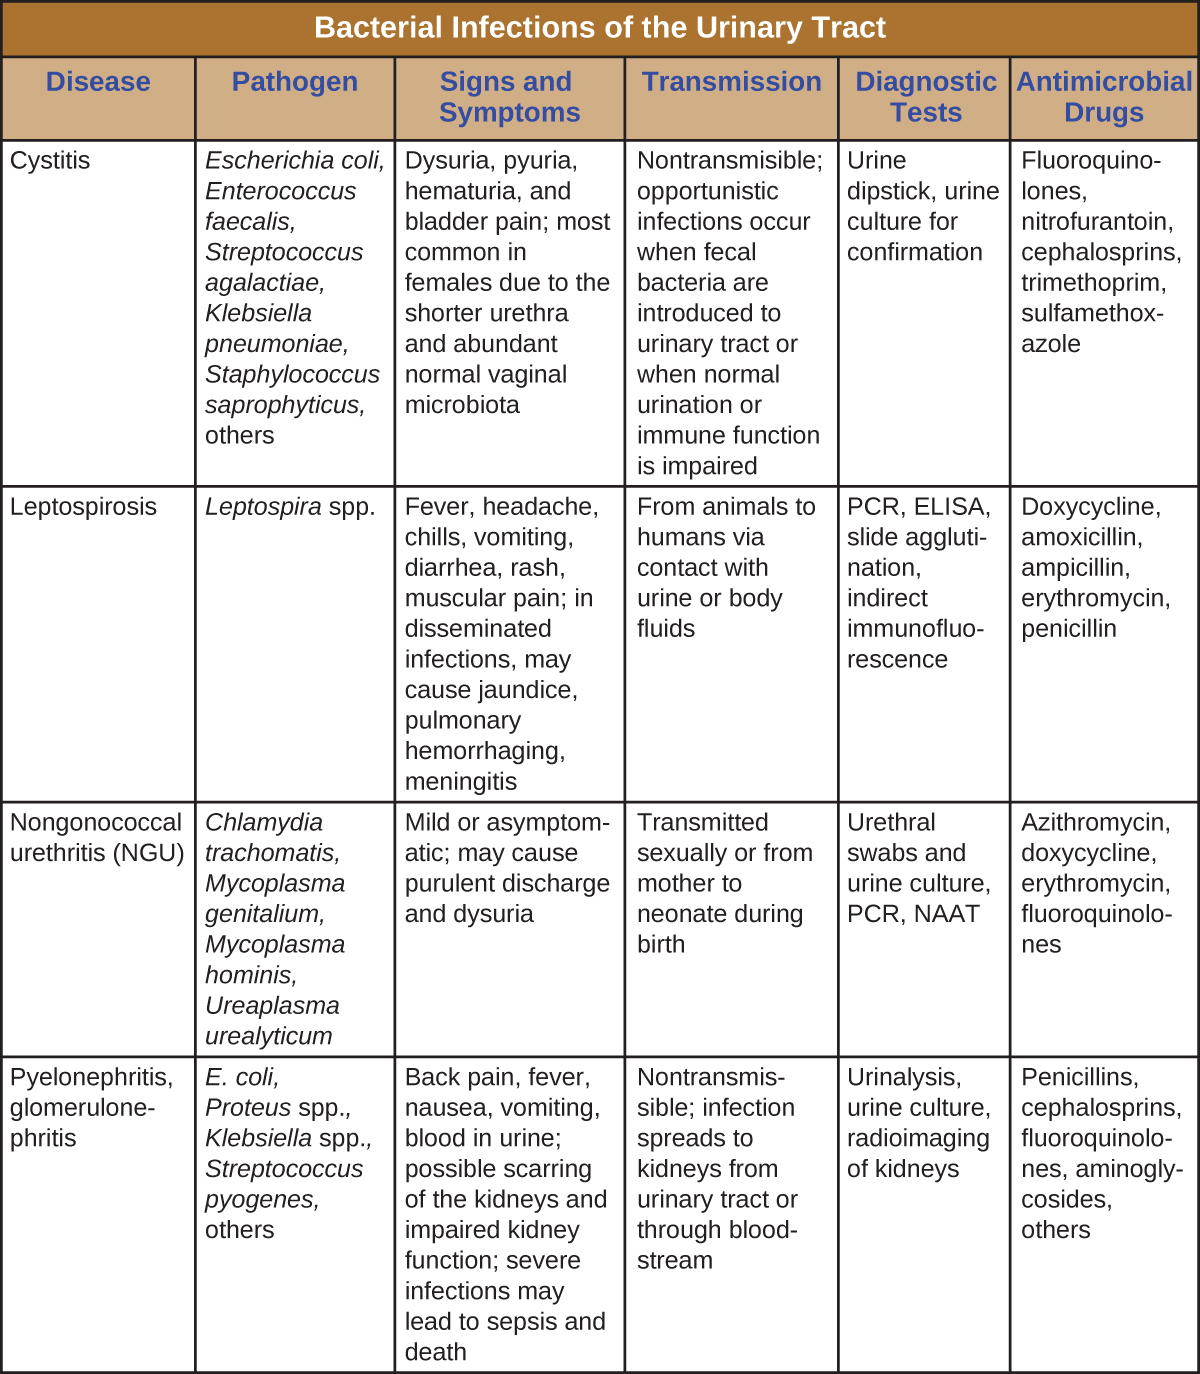 Table titled: Bacterial Infections of the Urinary Tract. Columns: Disease, Pathogen, Signs and Symptoms, Transmission, Diagnostic Tests, Antimicrobial Drugs. Disease - Cystitis; Escherichia coli, Enterococcus faecalis, Streptococcus agalactiae, Klebsiella pneumoniae, Staphylococcus saprophyticus, others; Dysuria, pyuria, hematuria, and bladder pain; most common in females due to the shorter urethra and abundant normal vaginal microbiota; Nontransmissible; opportunistic infections occur when fecal bacteria are introduced to urinary tract or when normal urination or immune function is impaired; Urine dipstick, urine culture for confirmation; Fluoroquinolones, nitrofurantoin, cephalosporins, trimethoprim, sulfamethoxazole. Disease - Leptospirosis; Leptospira spp.; Fever, headache, chills, vomiting, diarrhea, rash, muscular pain; in disseminated infections, may cause jaundice, pulmonary hemorrhaging, meningitis; From animals to humans via contact with urine or body fluids; PCR, ELISA, slide agglutination, indirect immunofluorescence; Doxycycline, amoxicillin, ampicillin, erythromycin, penicillin. Disease - Nongonococcal urethritis (NGU); Chlamydia trachomatis, Mycoplasma genitalium, Mycoplasma hominis, Ureaplasma urealyticum; Mild or asymptomatic; may cause purulent discharge and dysuria Transmitted sexually or from mother to neonate during birth; Urethral swabs and urine culture, PCR, NAAT; Azithromycin, doxycycline, erythromycin, fluoroquinolones. Disease Pyelonephritis, glomerulonephritis; E. coli, Proteus spp., Klebsiella spp., Streptococcus pyogenes, others; Back pain, fever, nausea, vomiting, blood in urine; possible scarring of the kidneys and impaired kidney function; severe infections may lead to sepsis and death; Nontransmissible; infection spreads to kidneys from urinary tract or through bloodstream; Urinalysis, urine culture, radioimaging of kidneys; Penicillins, cephalosporins, fluoroquinolones, aminoglycosides, others